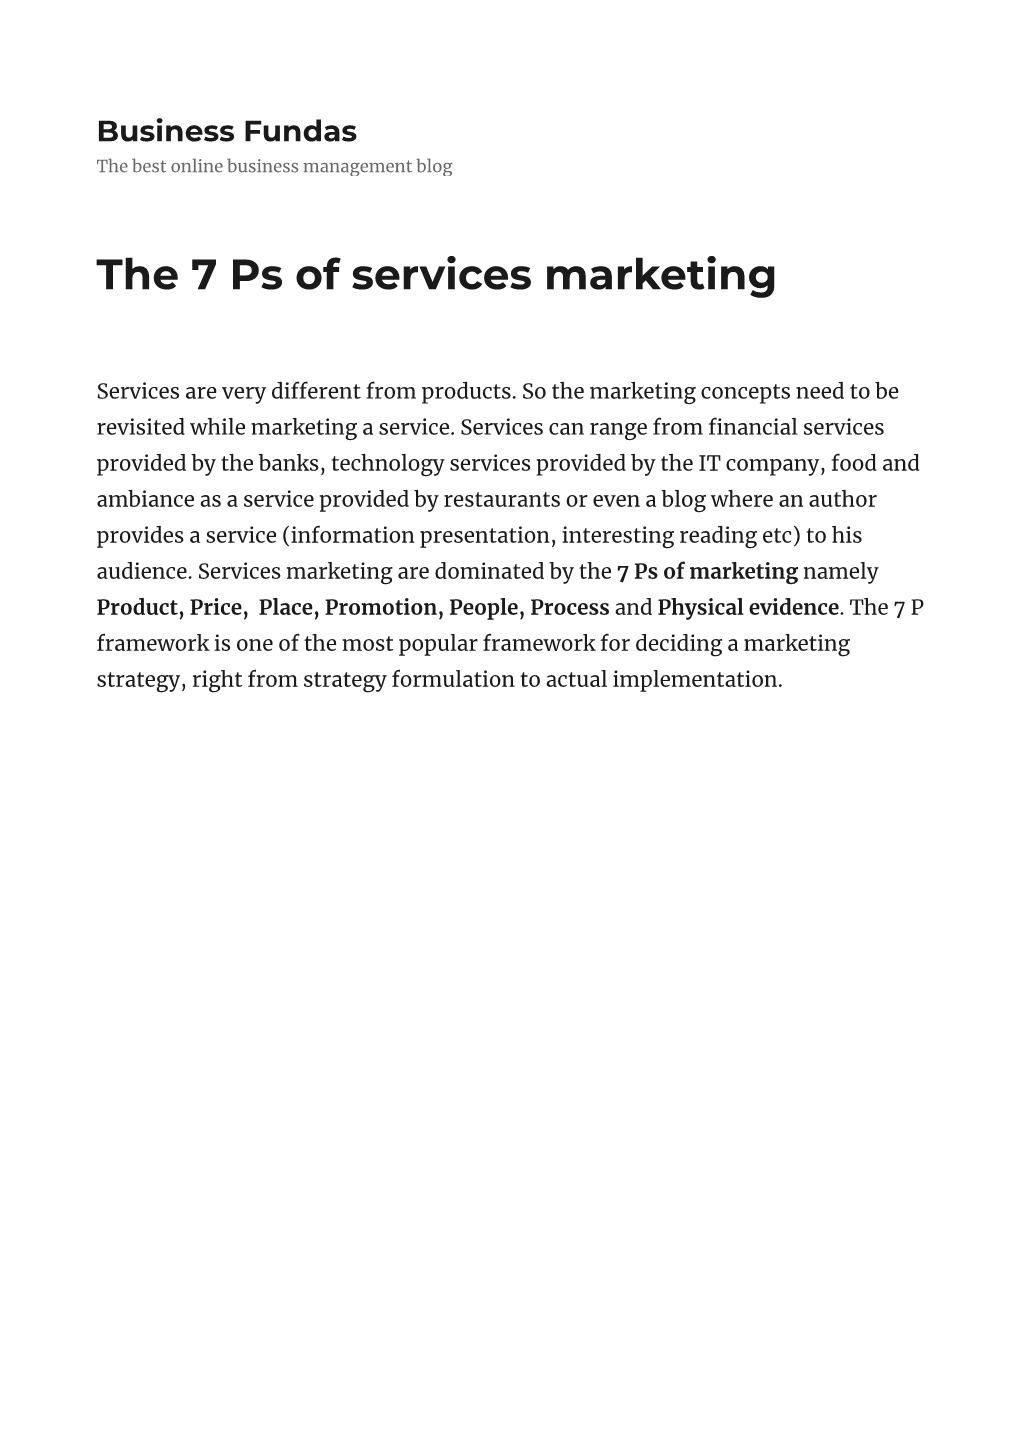 The 7 Ps of Services Marketing